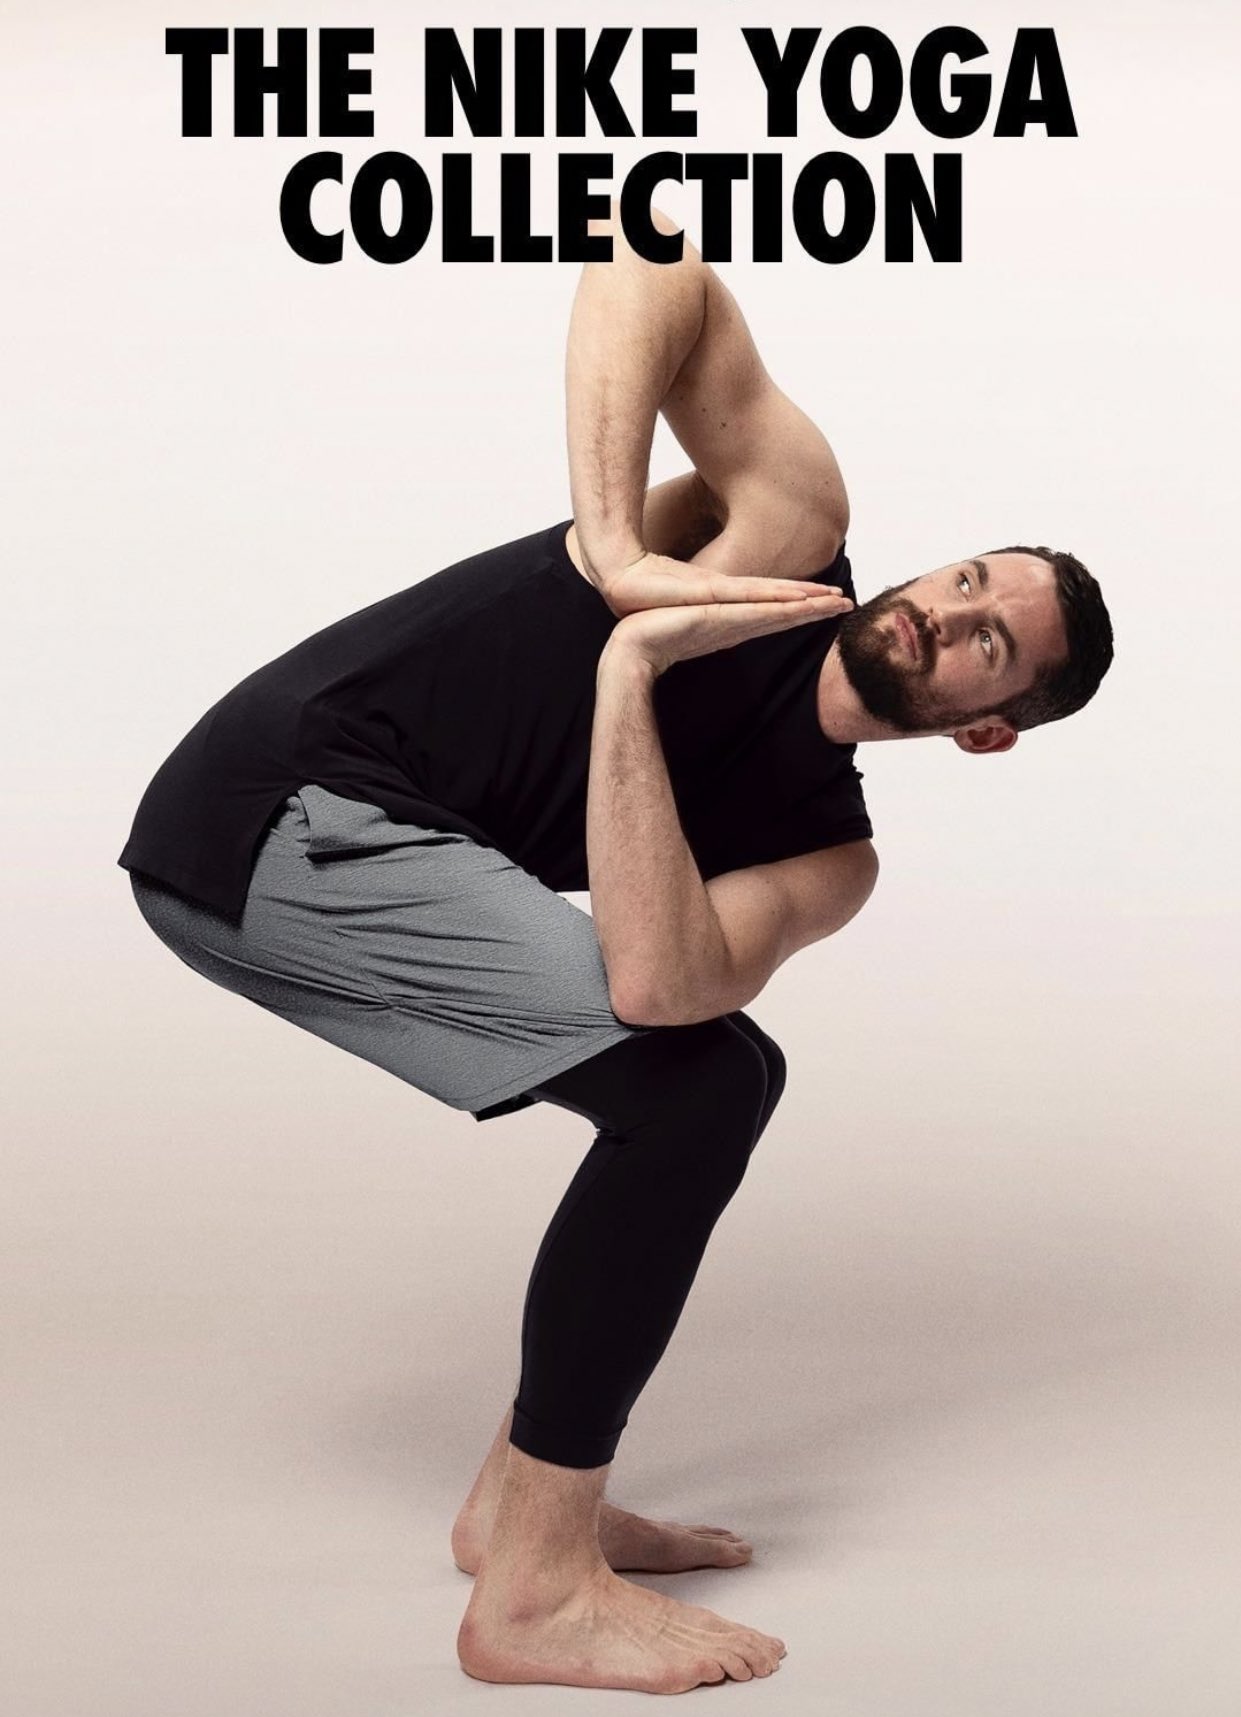 Darren Rovell on X: "Kevin Love Khalil Mack in promoting Nike's new Yoga collection. https://t.co/LJ7FUBABQP" / X